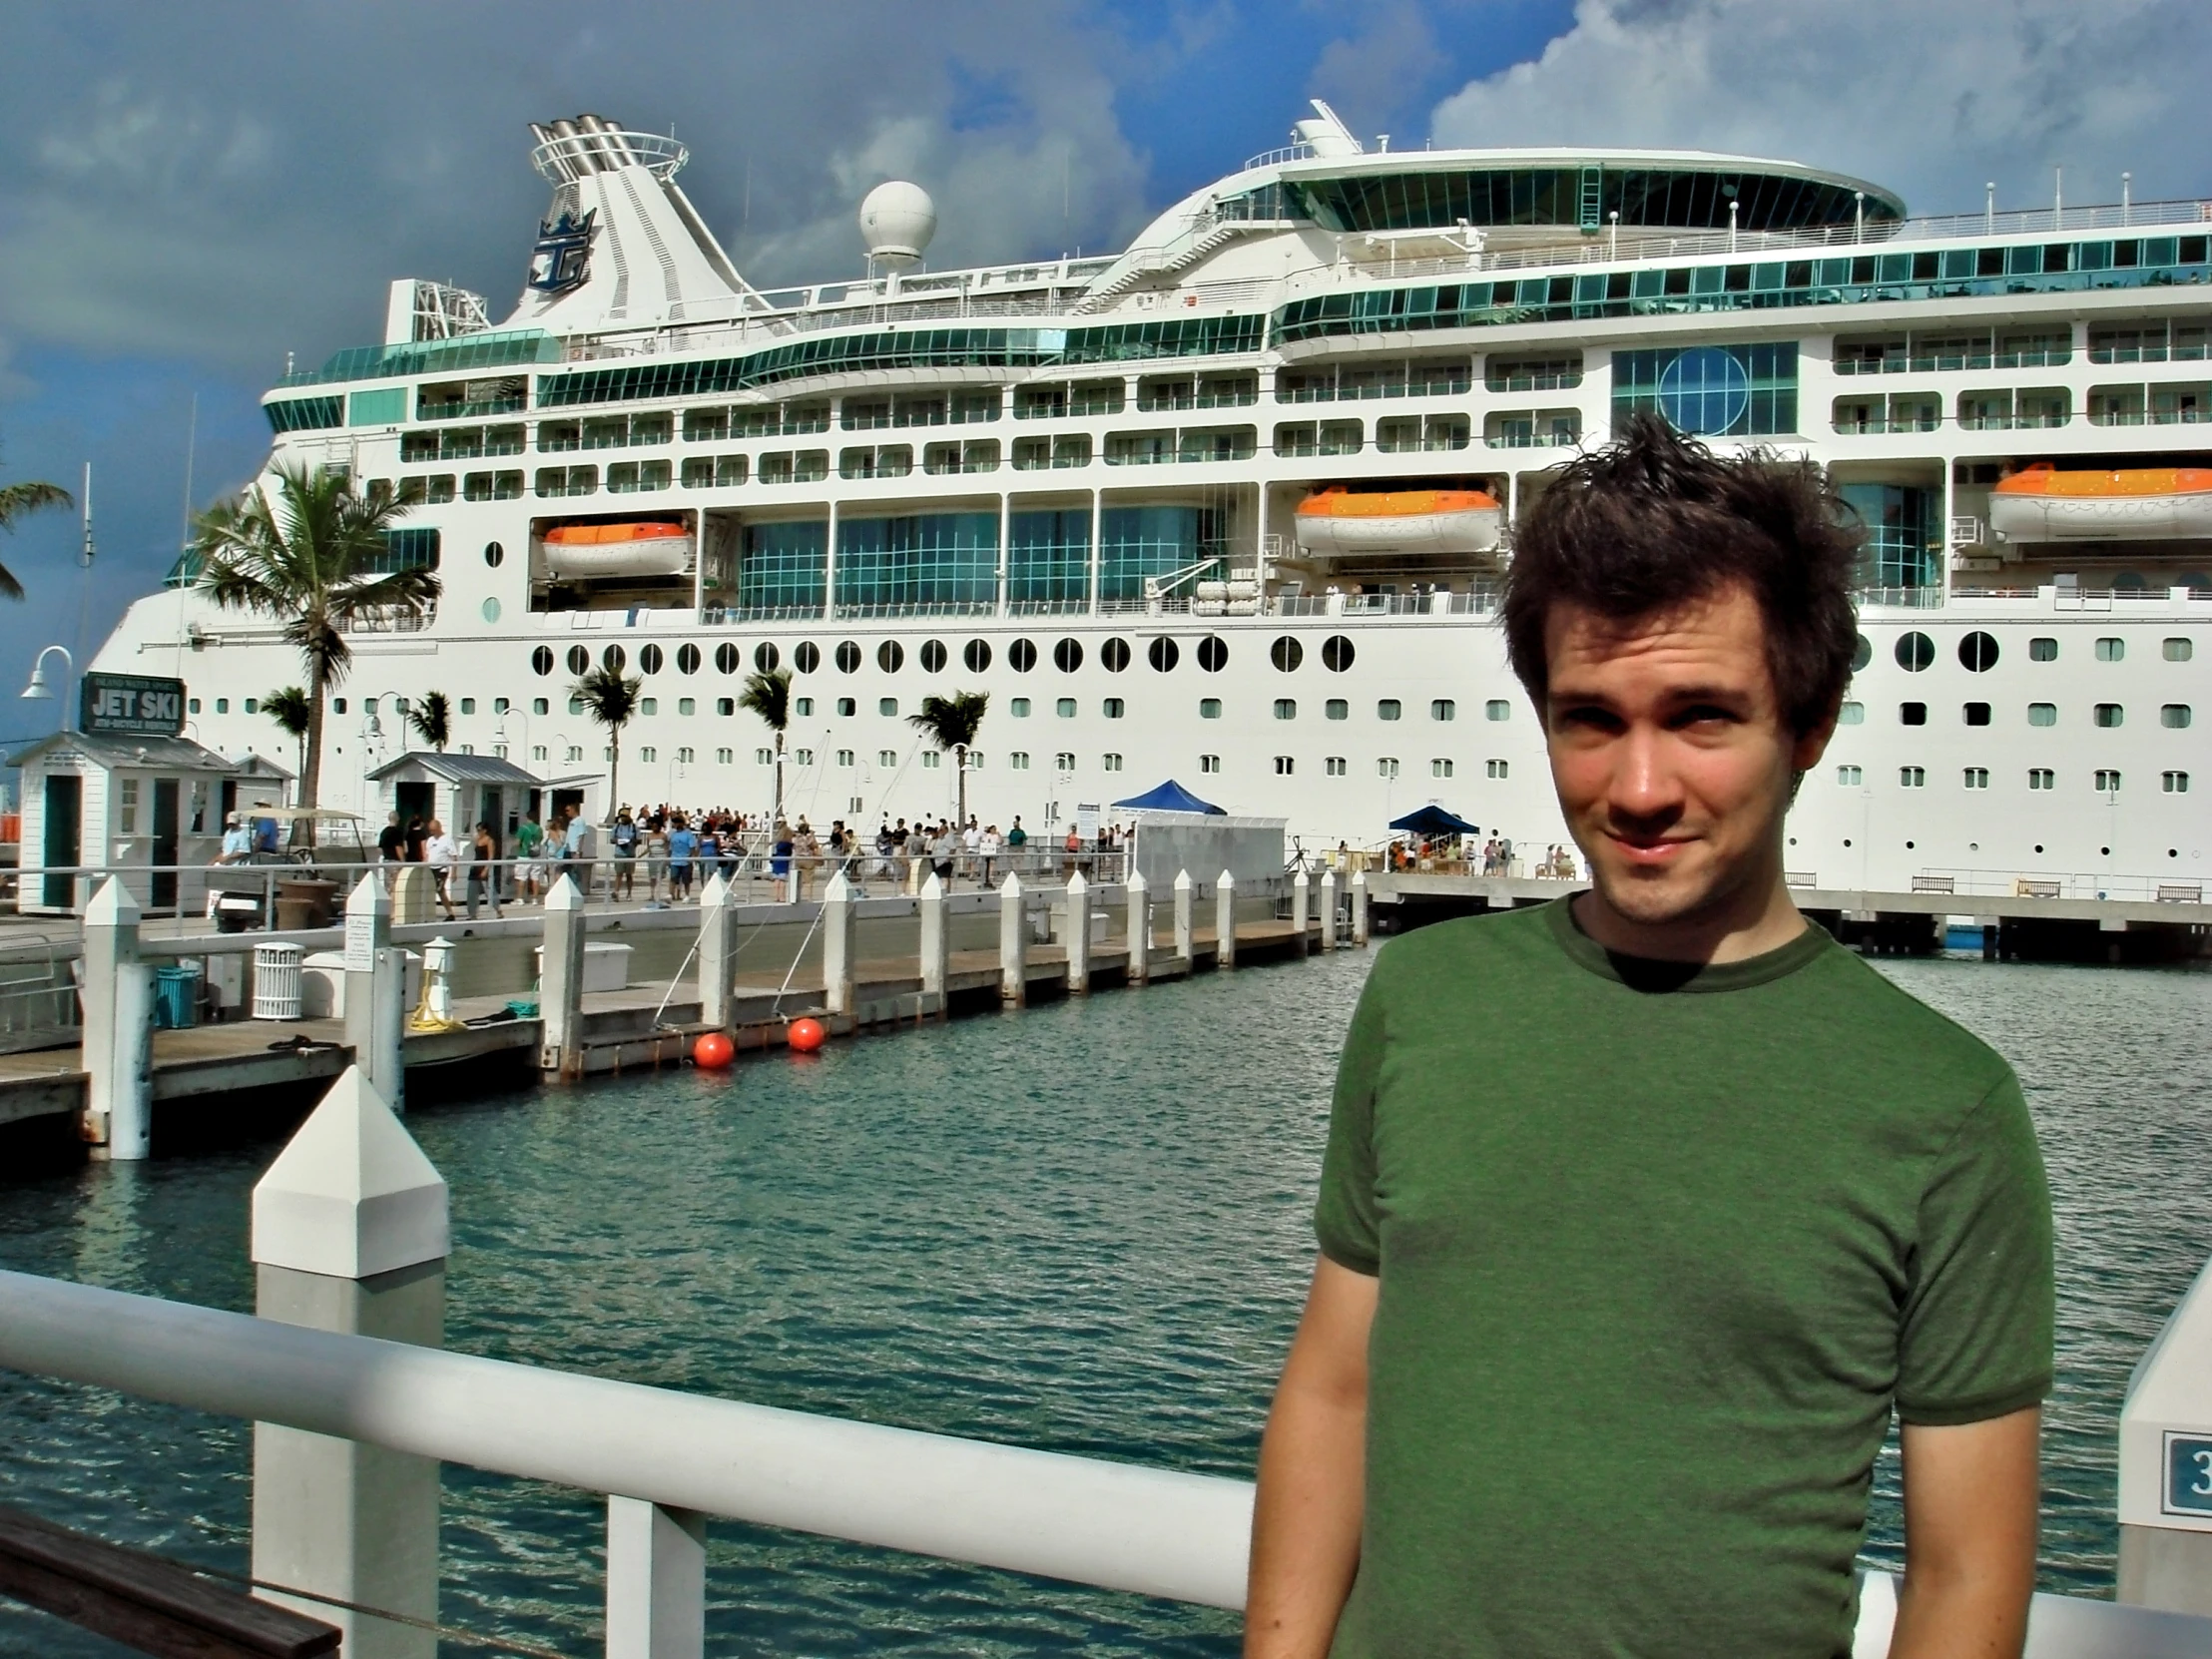 a man posing in front of a large cruise ship